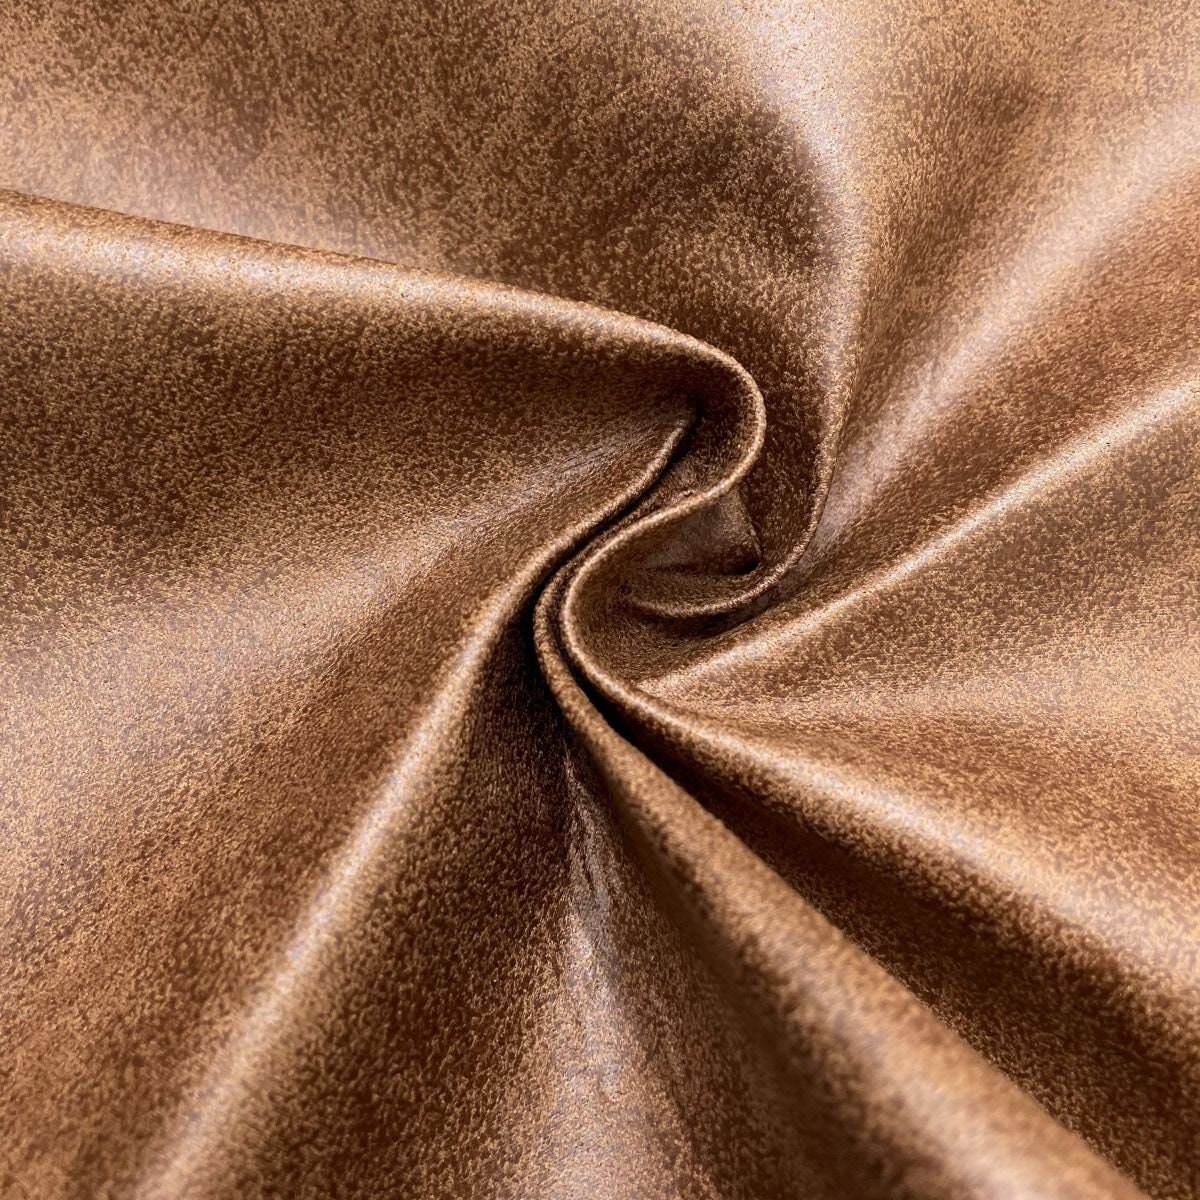 Faux Leather Upholstery Fabric. Flame Retardant Material to Cover Chairs  140cm Wide Medium Grain Vinyl Leatherette Plain Colored 